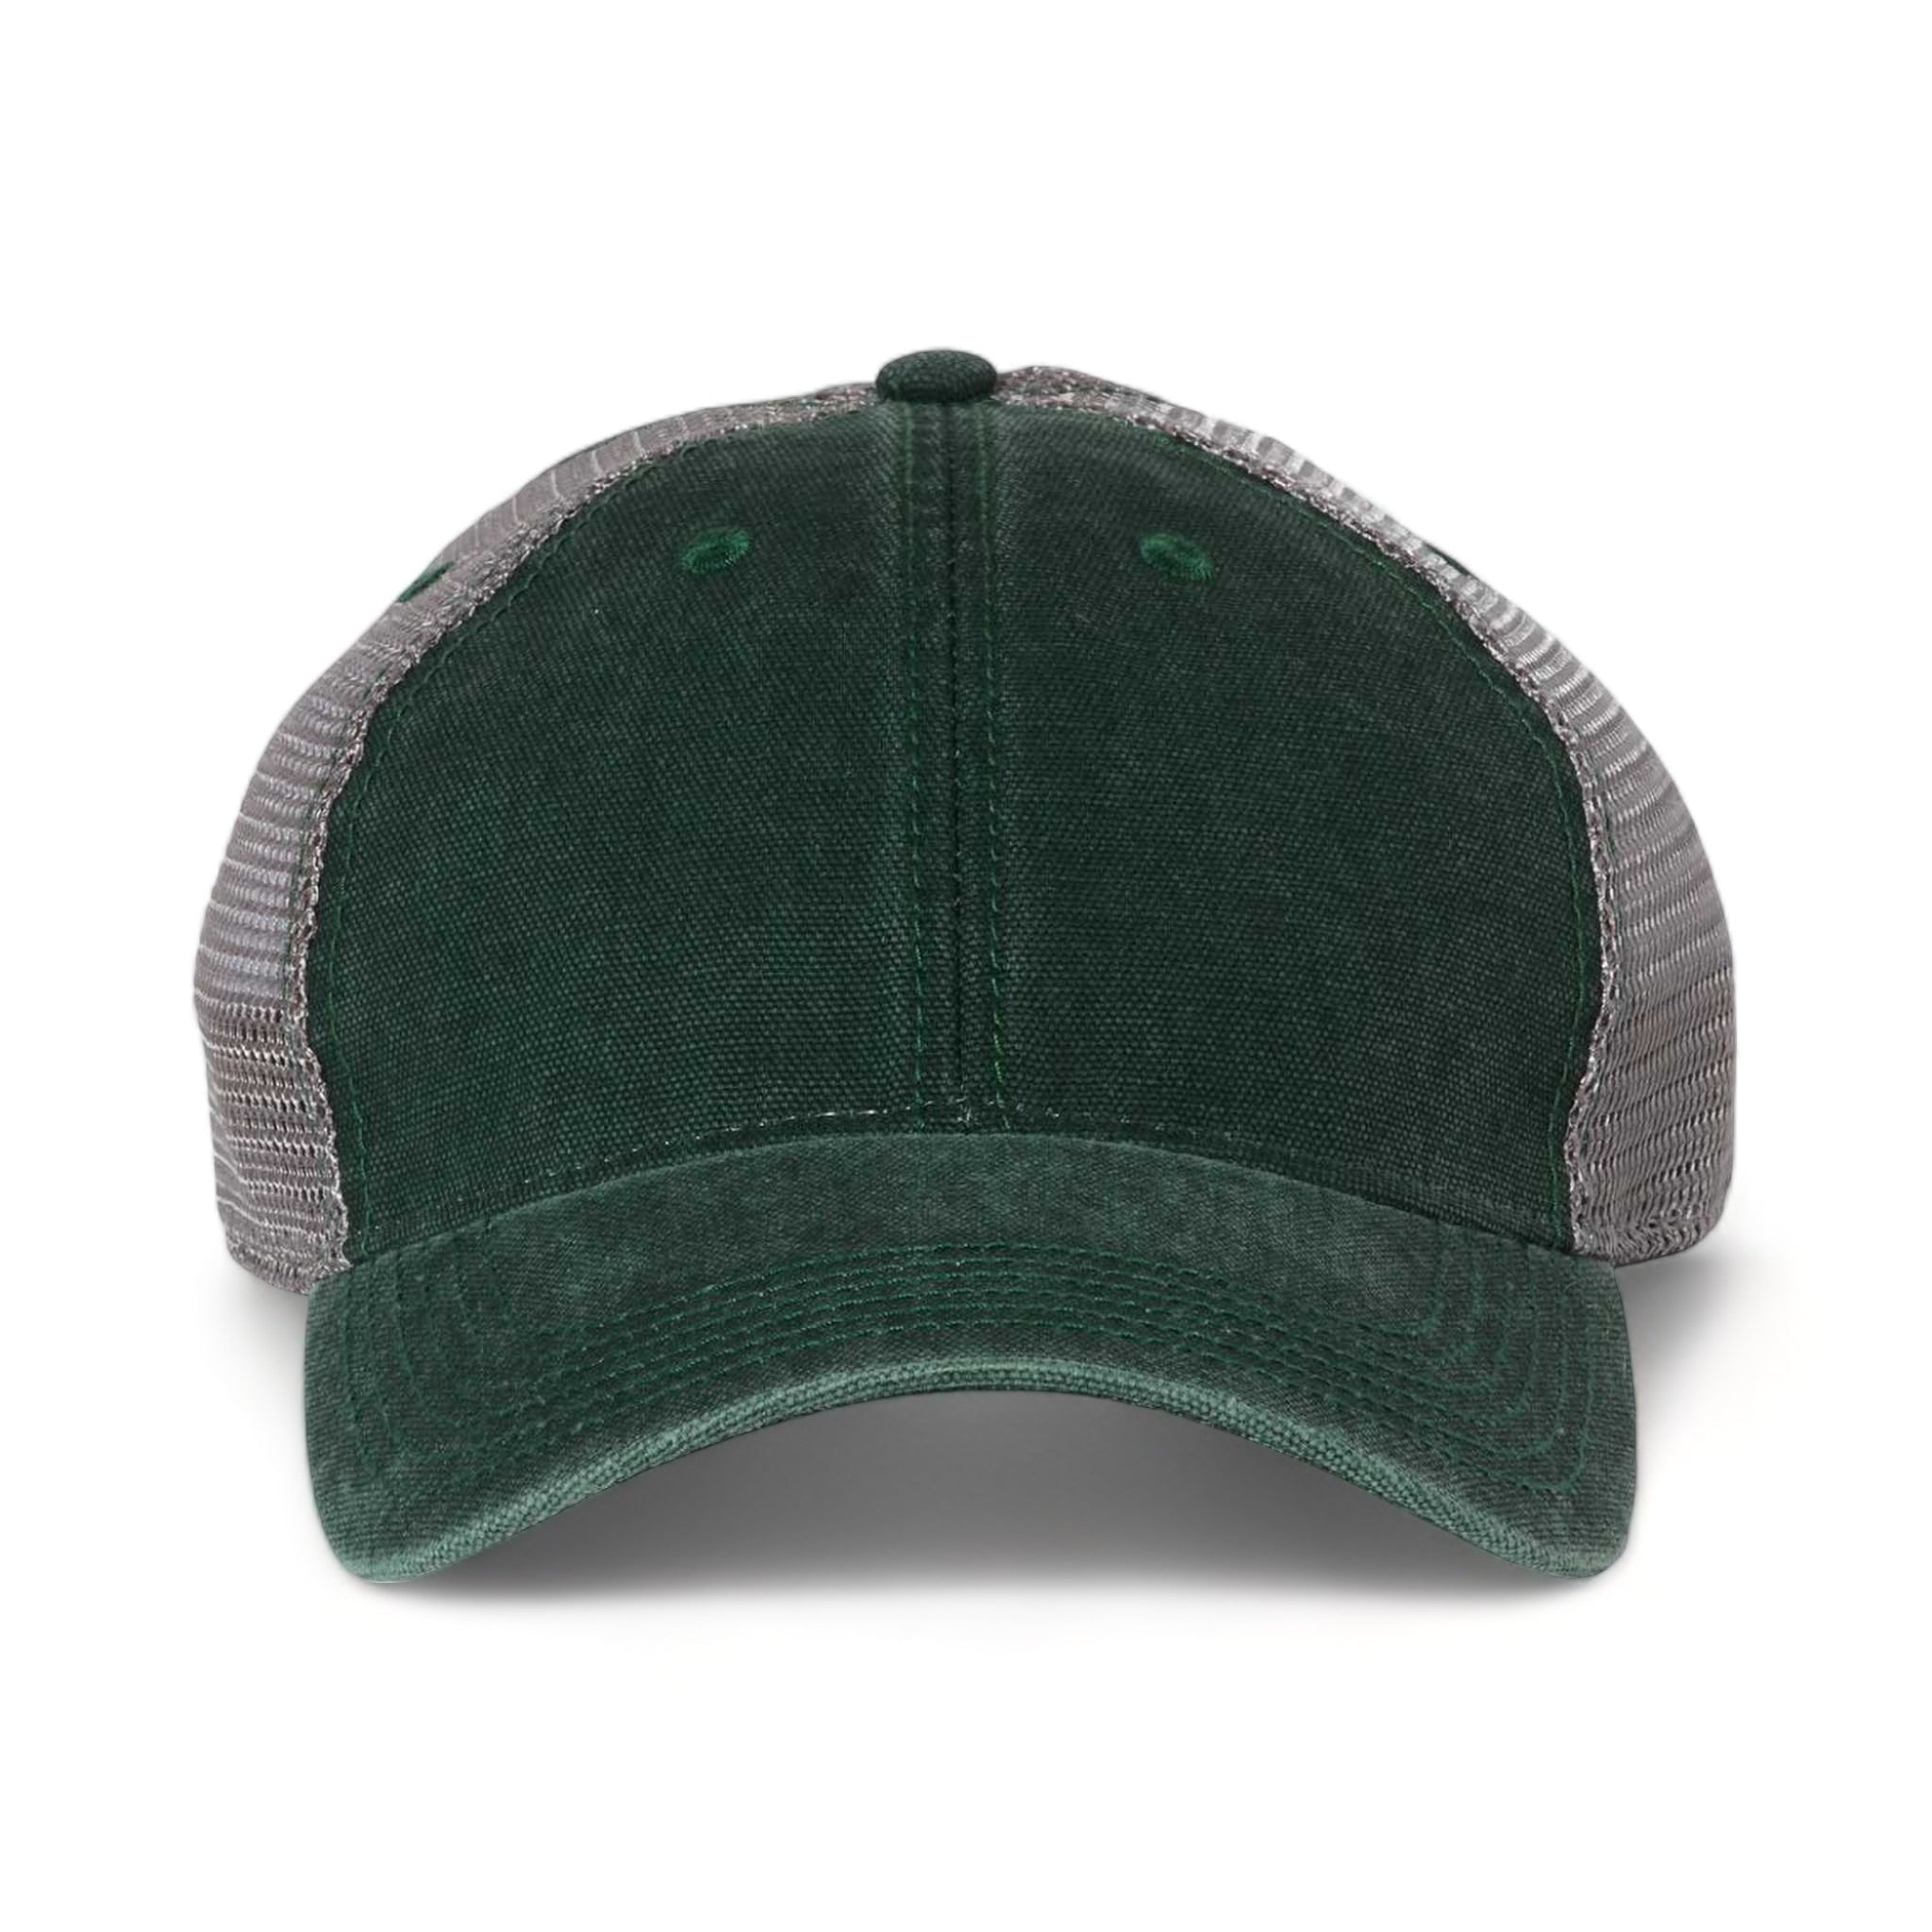 Front view of LEGACY DTA custom hat in dark green and grey